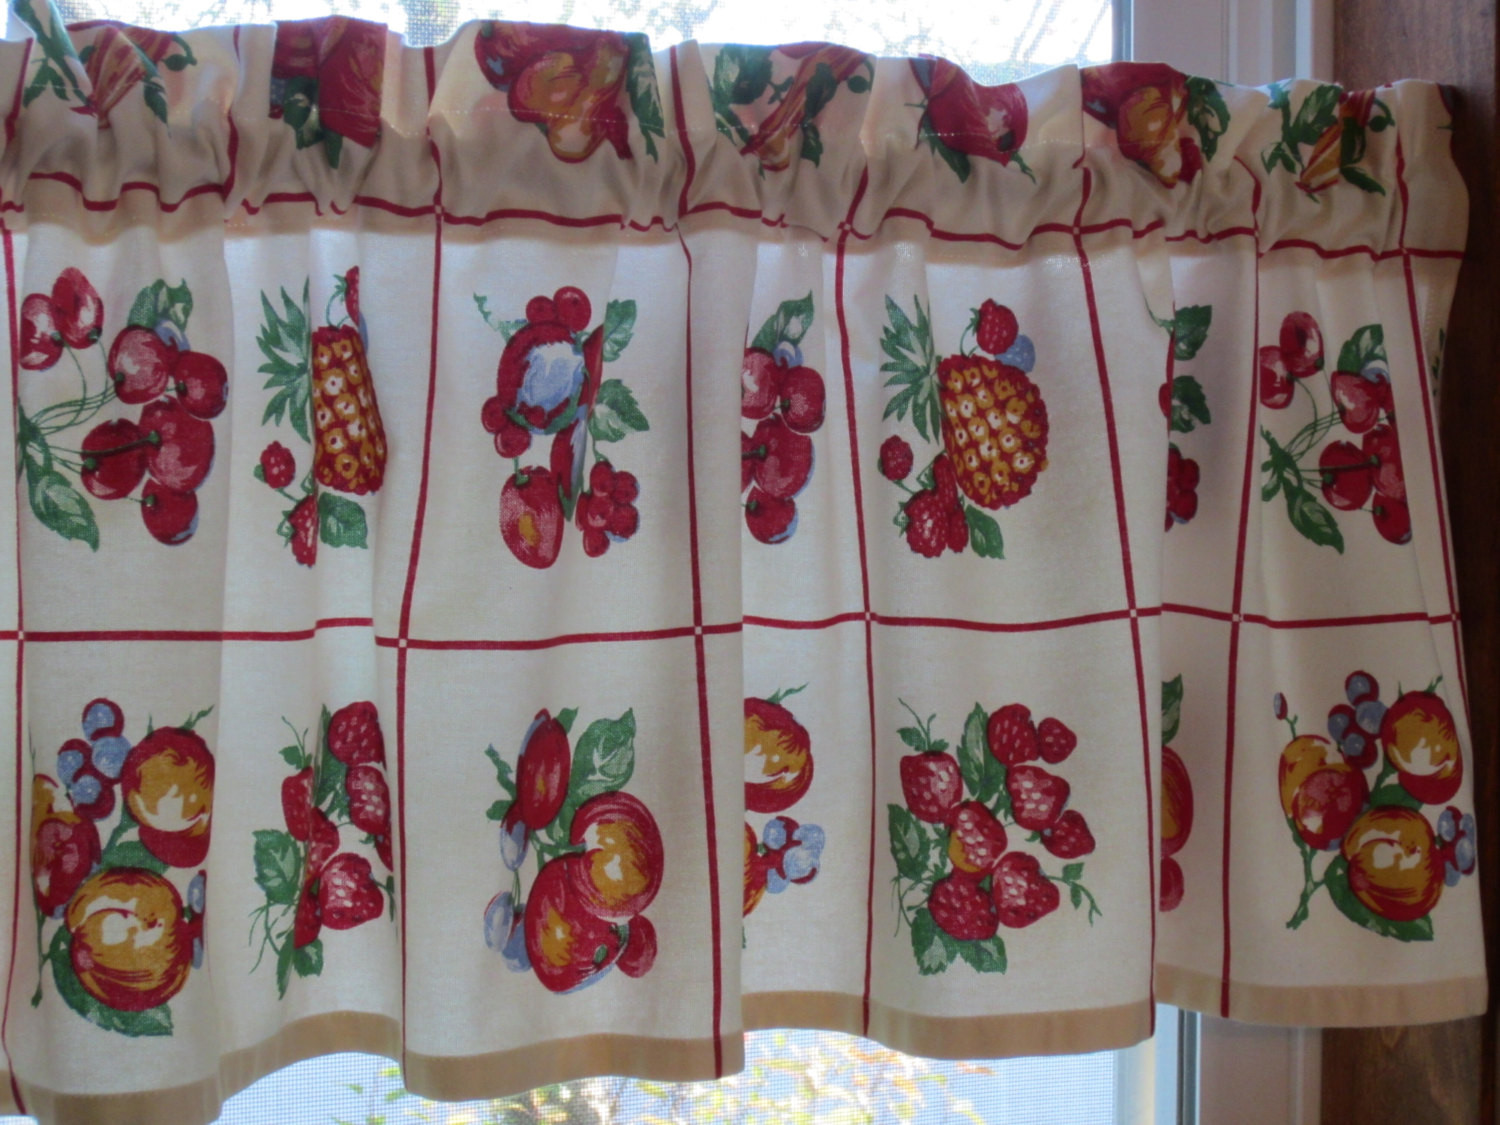 Fabric For Kitchen Curtain
 Retro Kitchen Curtain Valance New Fabric 48 X 13 1 2 Fruit